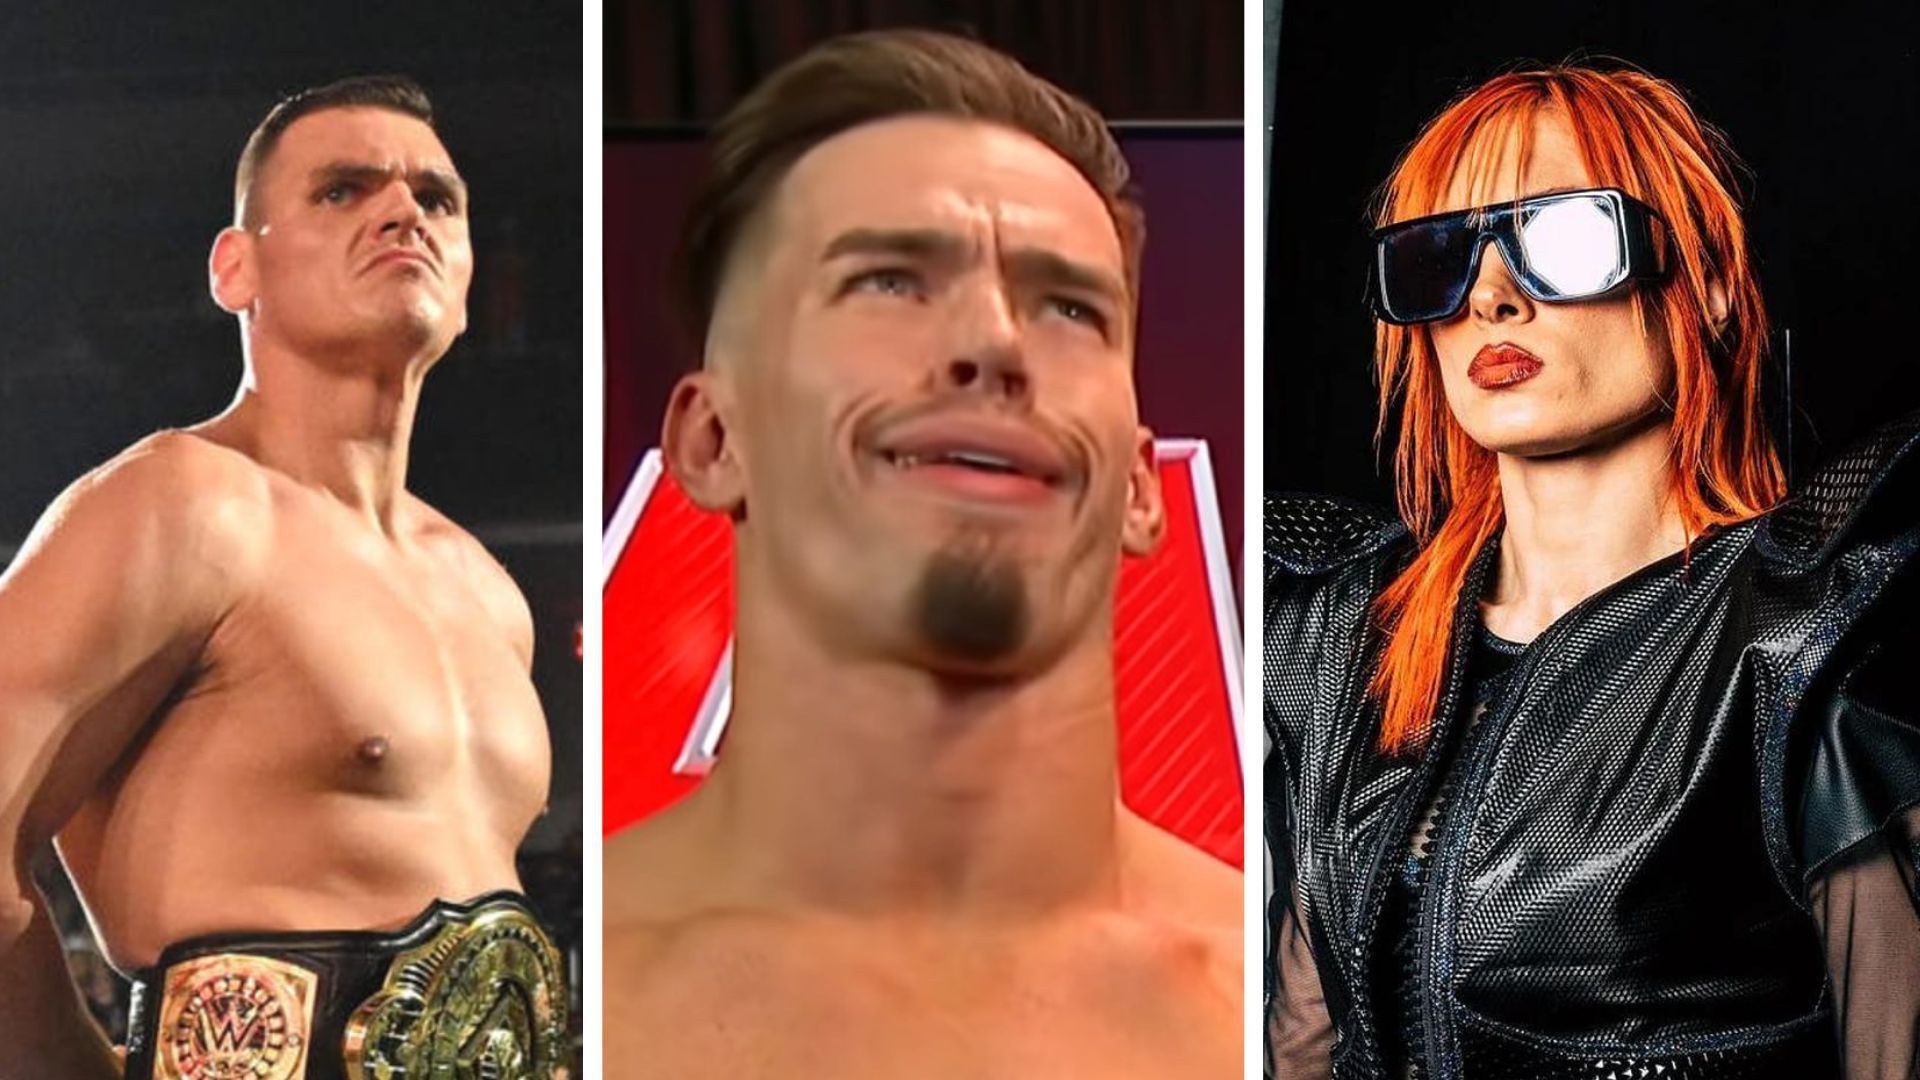 WWE currently has some interesting nicknames on the main roster